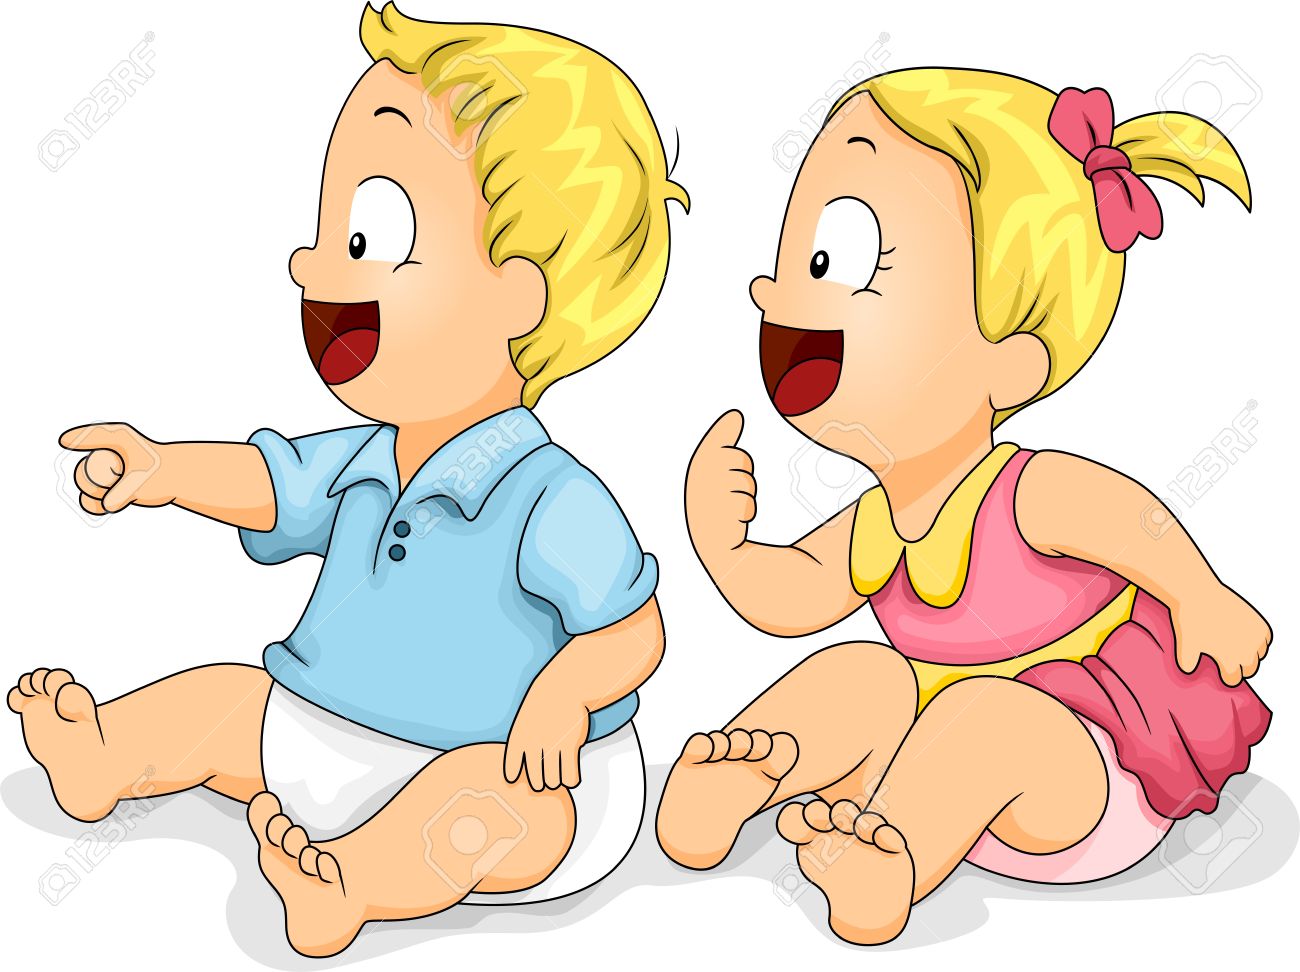 Illustration Showing Side View Of Happy Boy And Girl Toddlers.